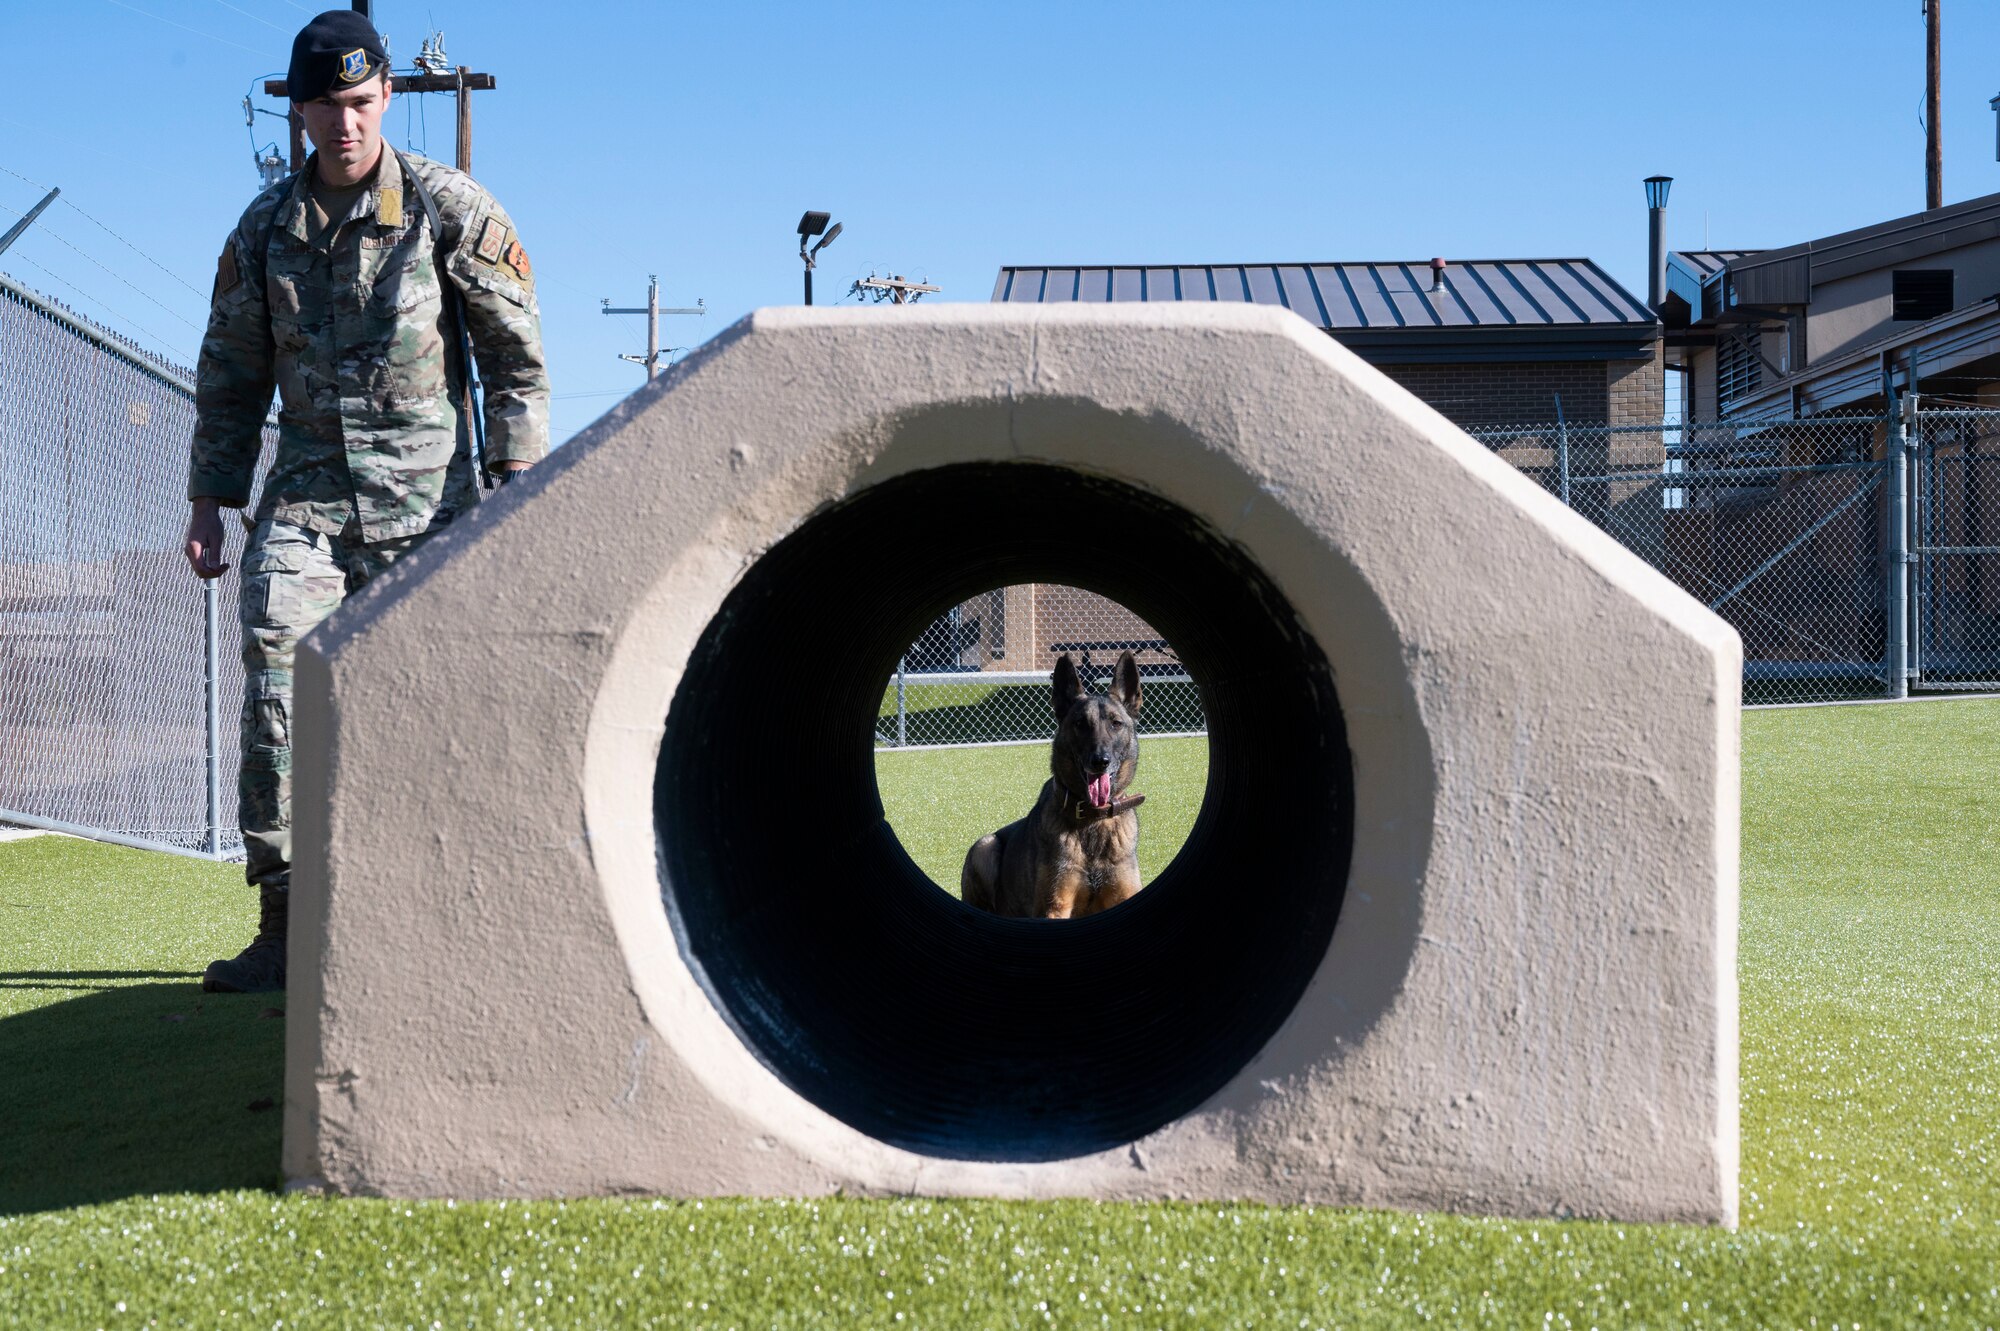 U.S. Air Force Staff Sgt. Charles Gaines, 47th Security Forces Squadron military working dog trainer, prepares military working dog Toku, to run through a tunnel at the 47th Security Forces Squadron military working dog training area at Laughlin Air Force Base, Texas, on Jan. 13, 2023. Military working dogs provide a variety of services, including the detection of explosives and drug searches, tracking of personnel and suspects, patrol of restricted areas, and protection of military installations. (U.S. Air Force photo by Airman 1st Class Kailee Reynolds)